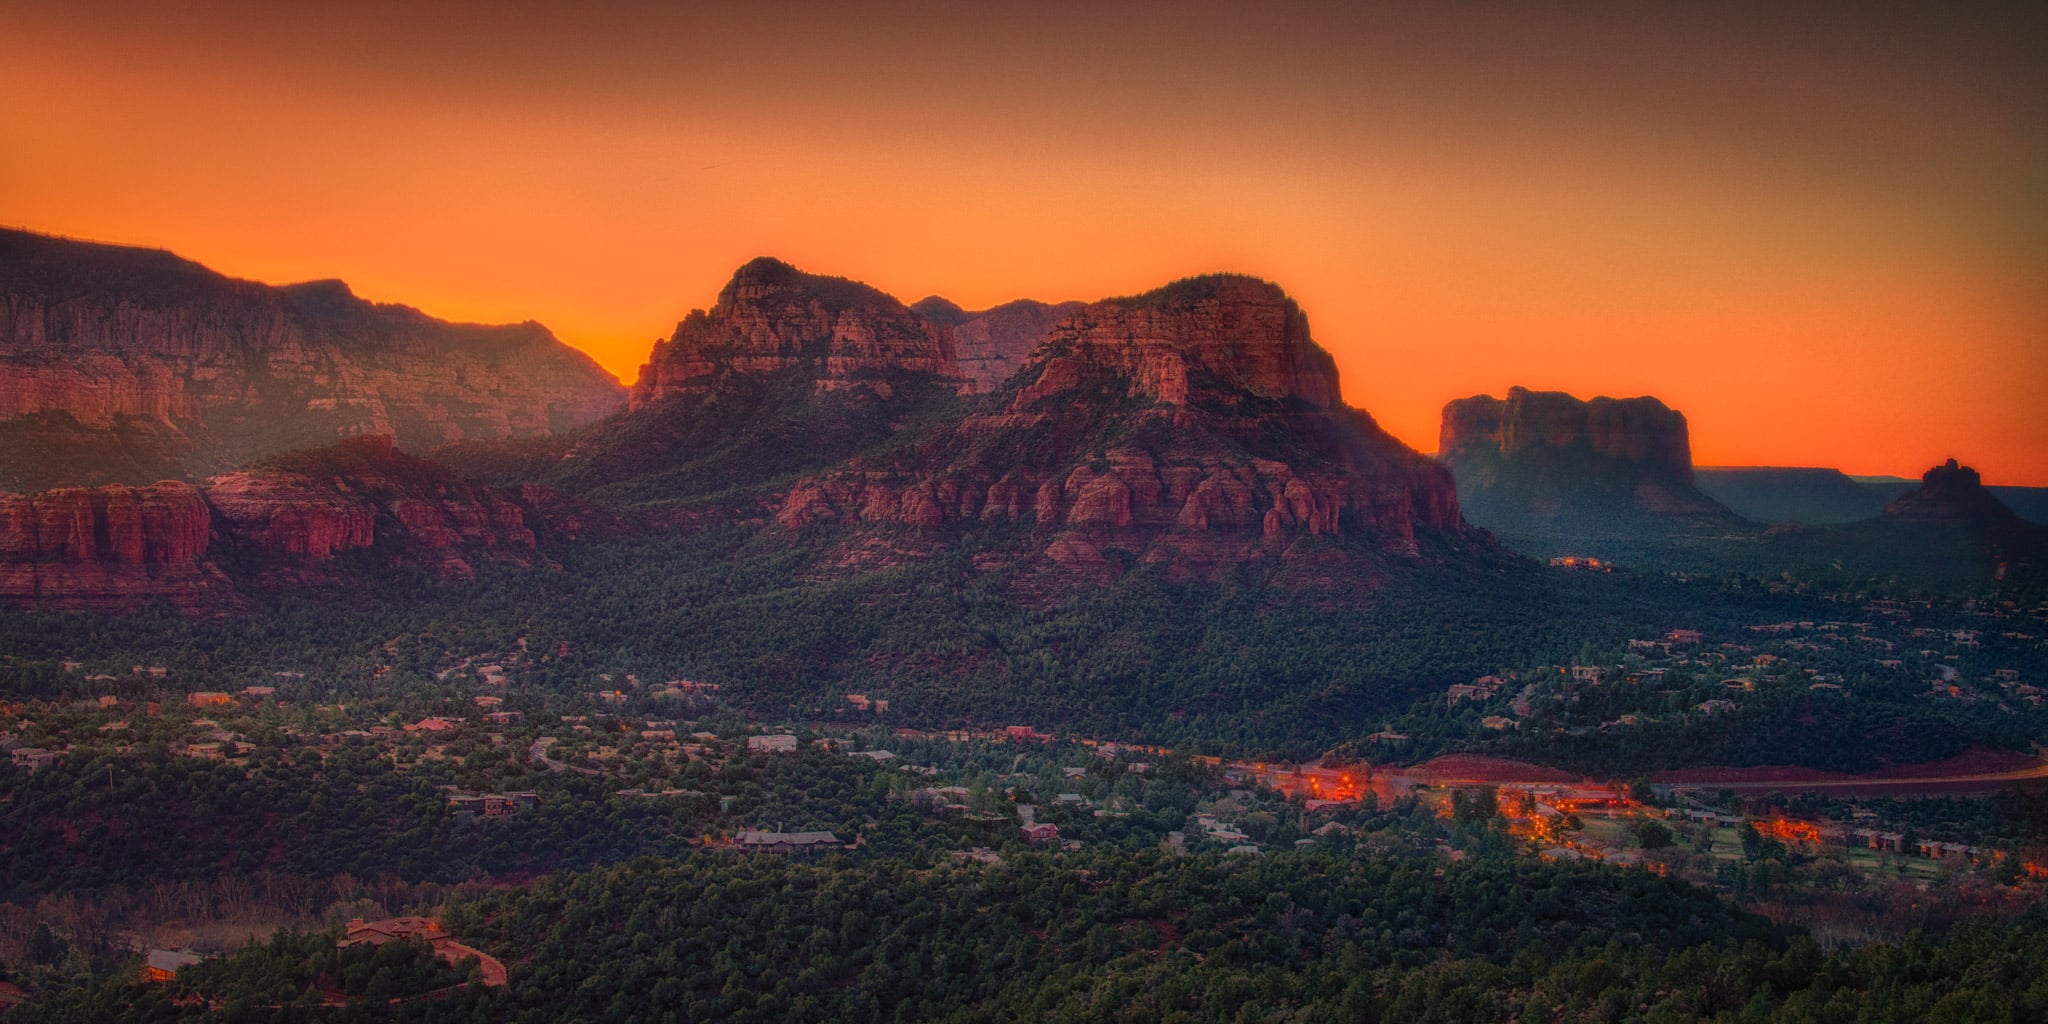 A view of Sedona as seen from the Sedona Arizona Airport at sunset.